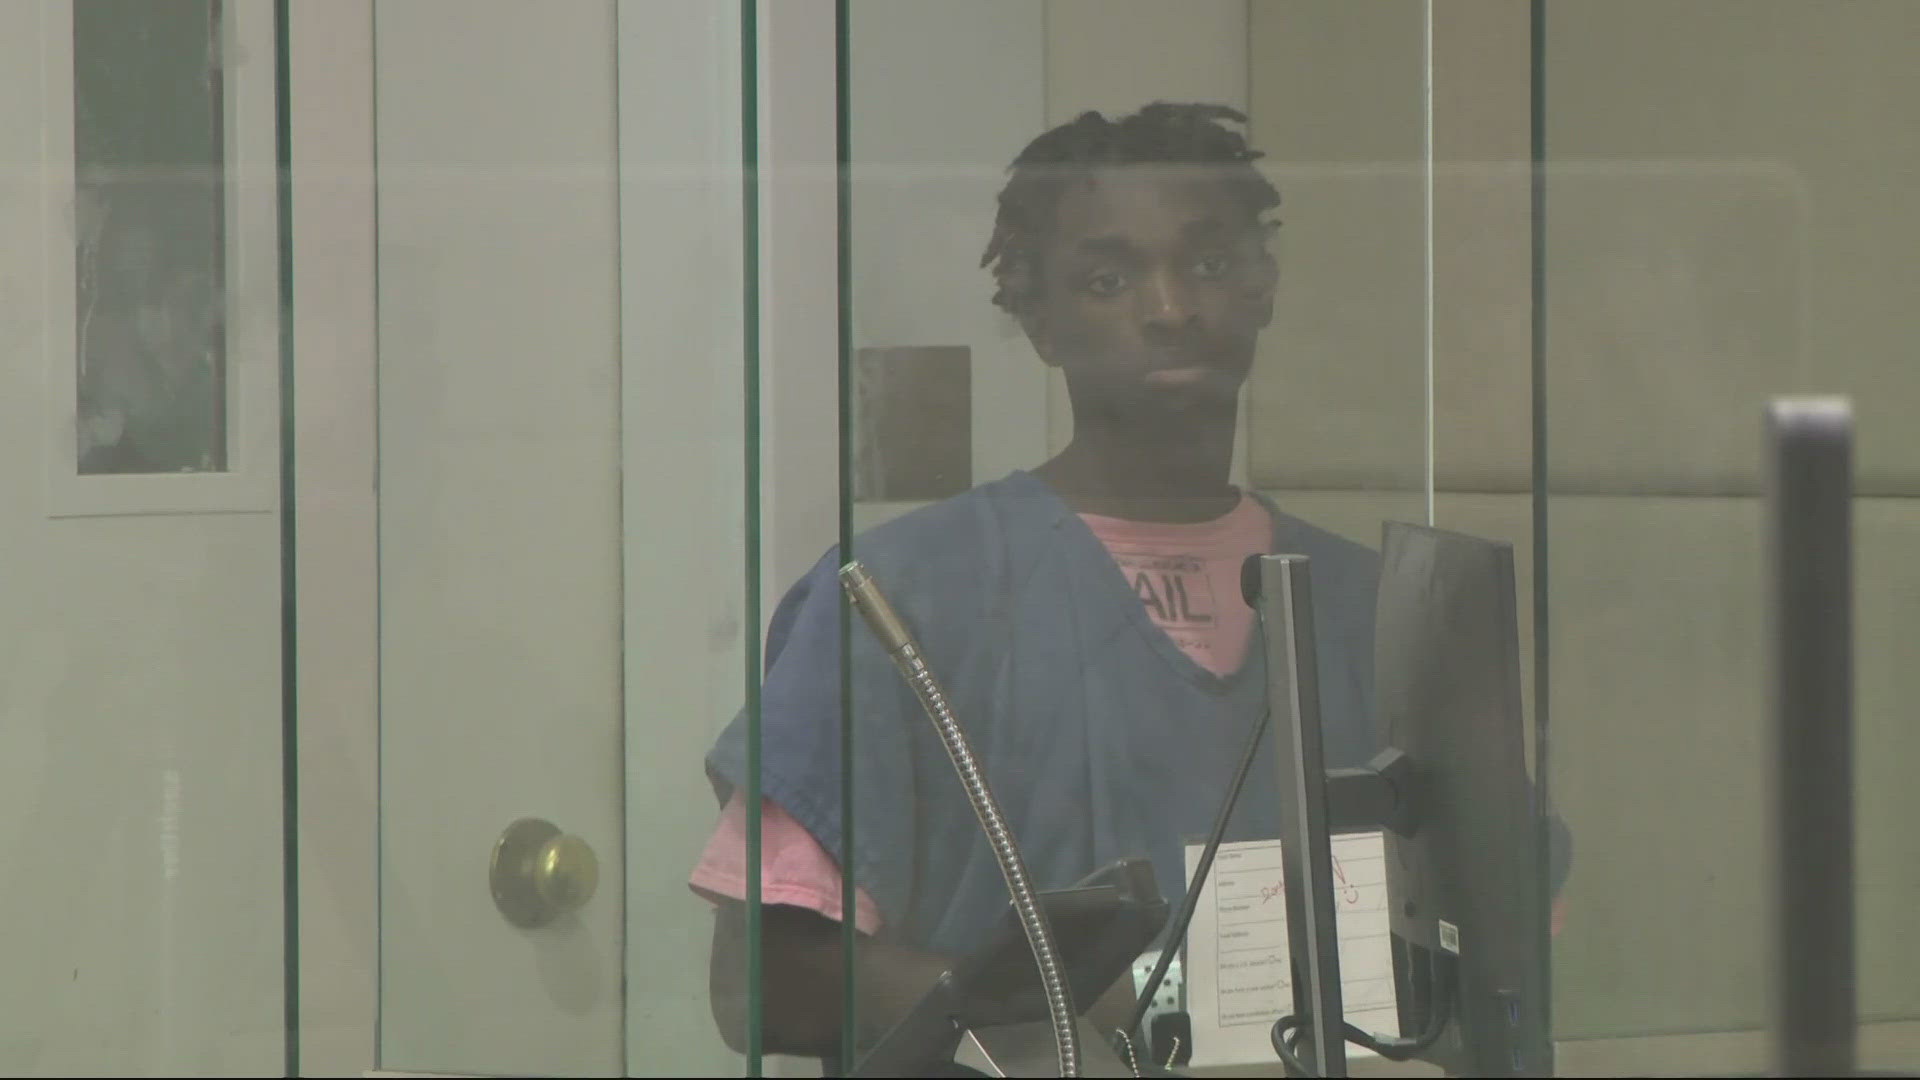 Omar Osman made his first court appearance, accused of shooting and killing three people in a North Portland neighborhood in 2023.